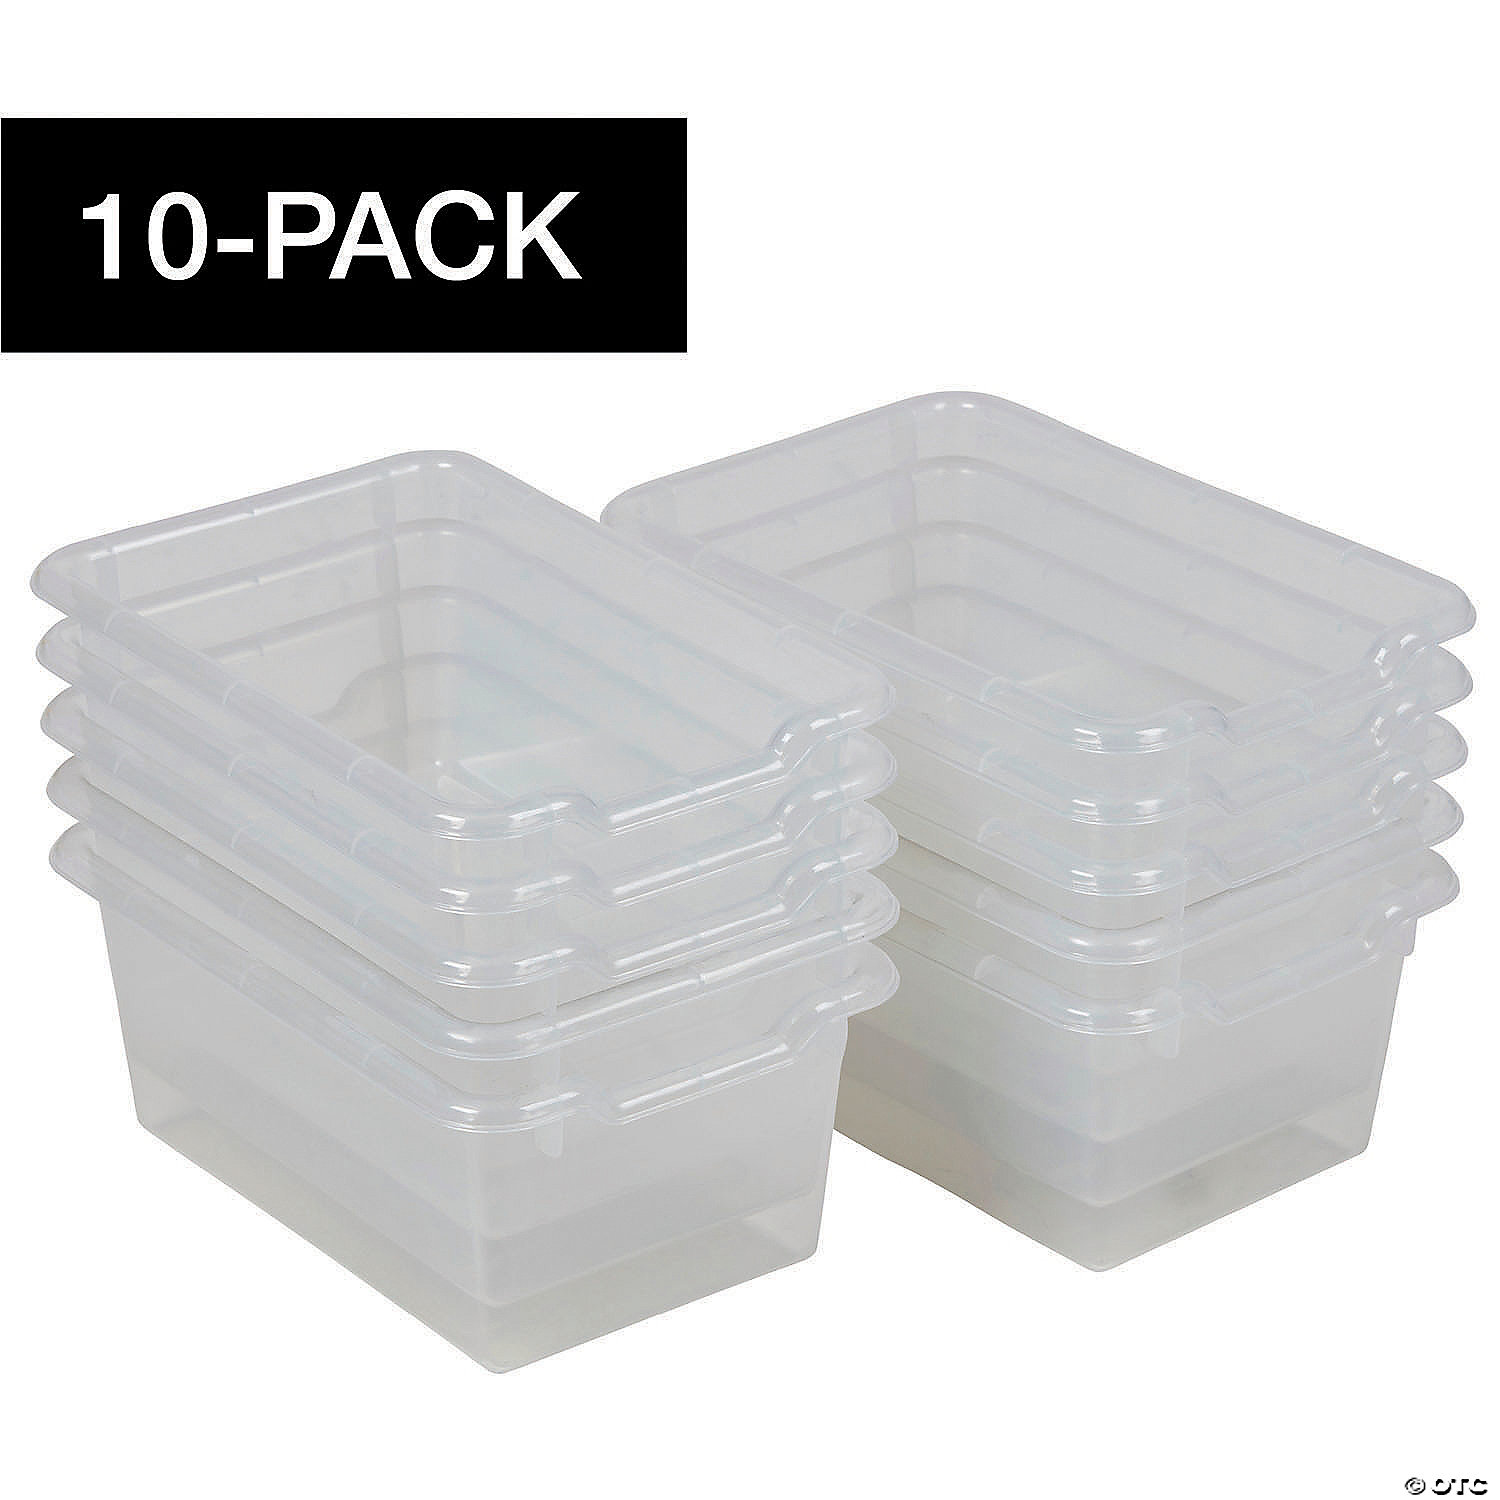 10 PACK of CONTAINERS